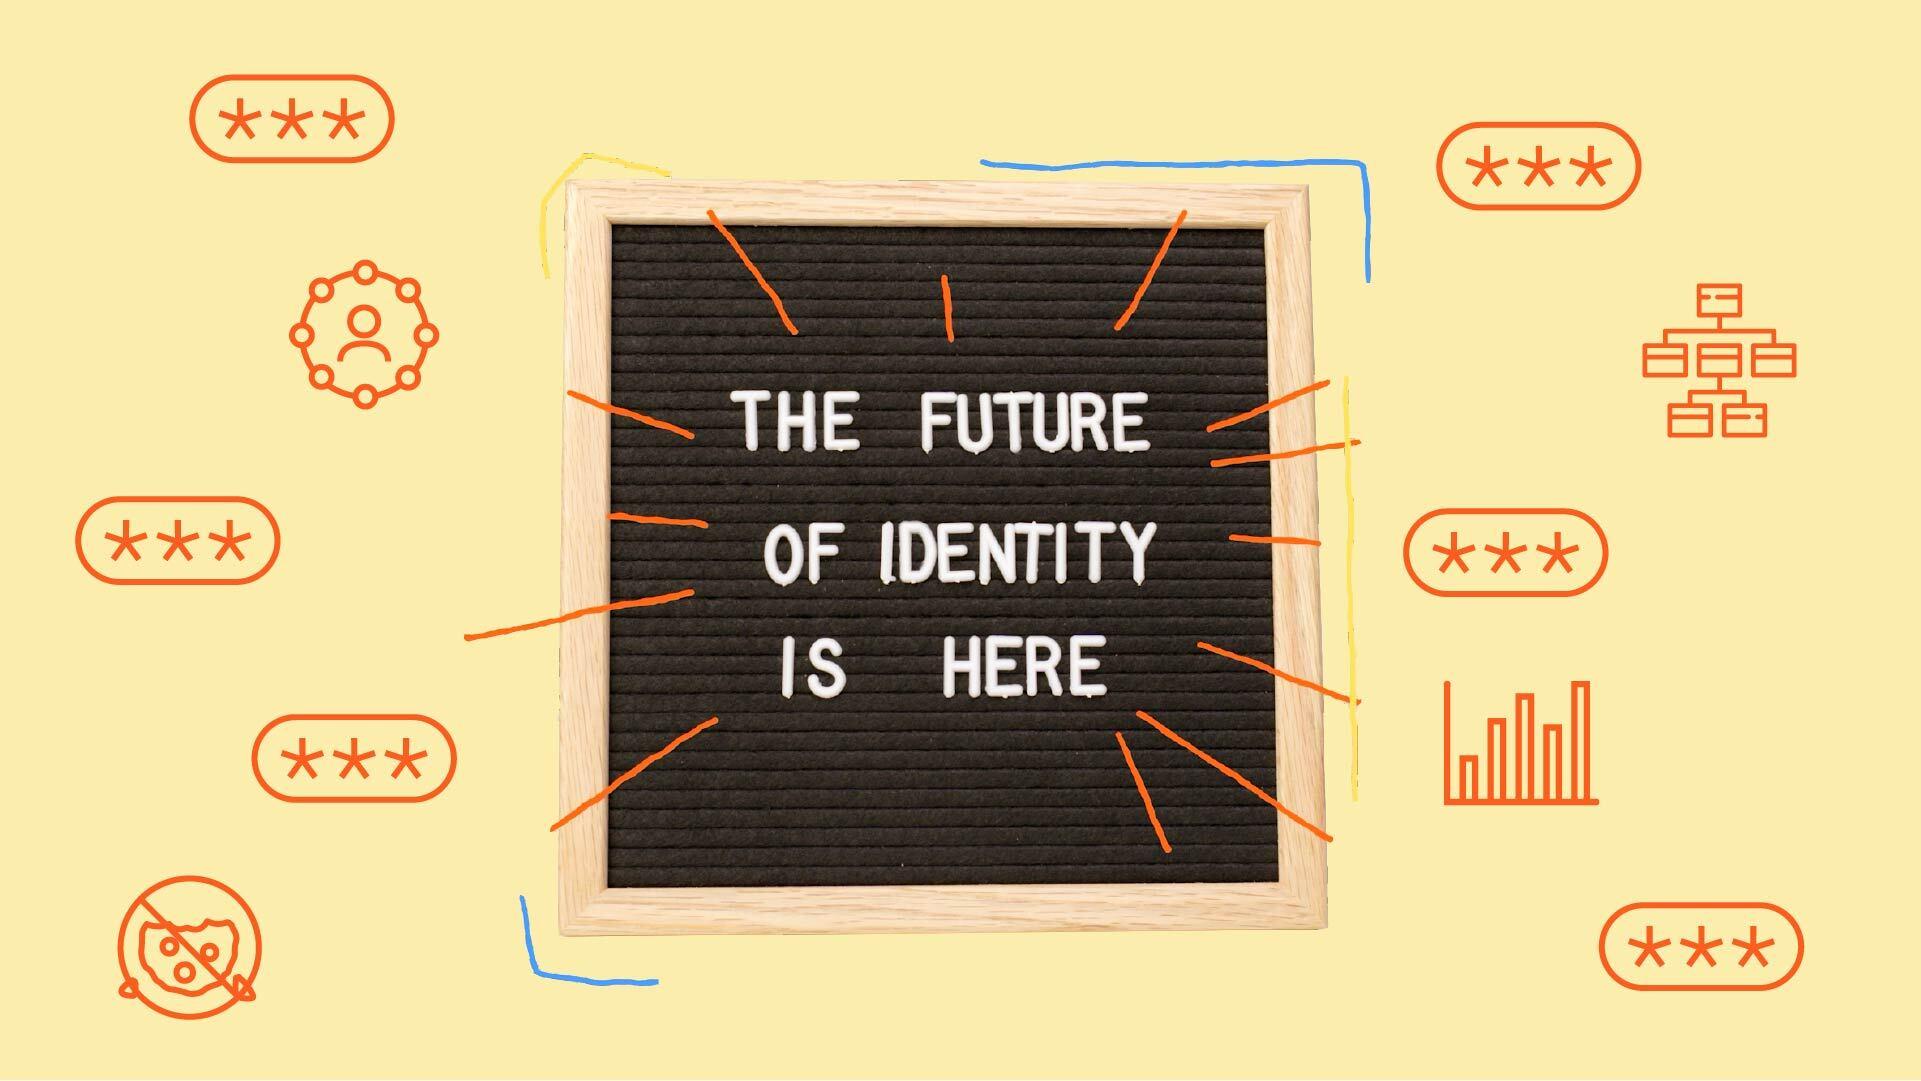 "The Future of Identity is Here"